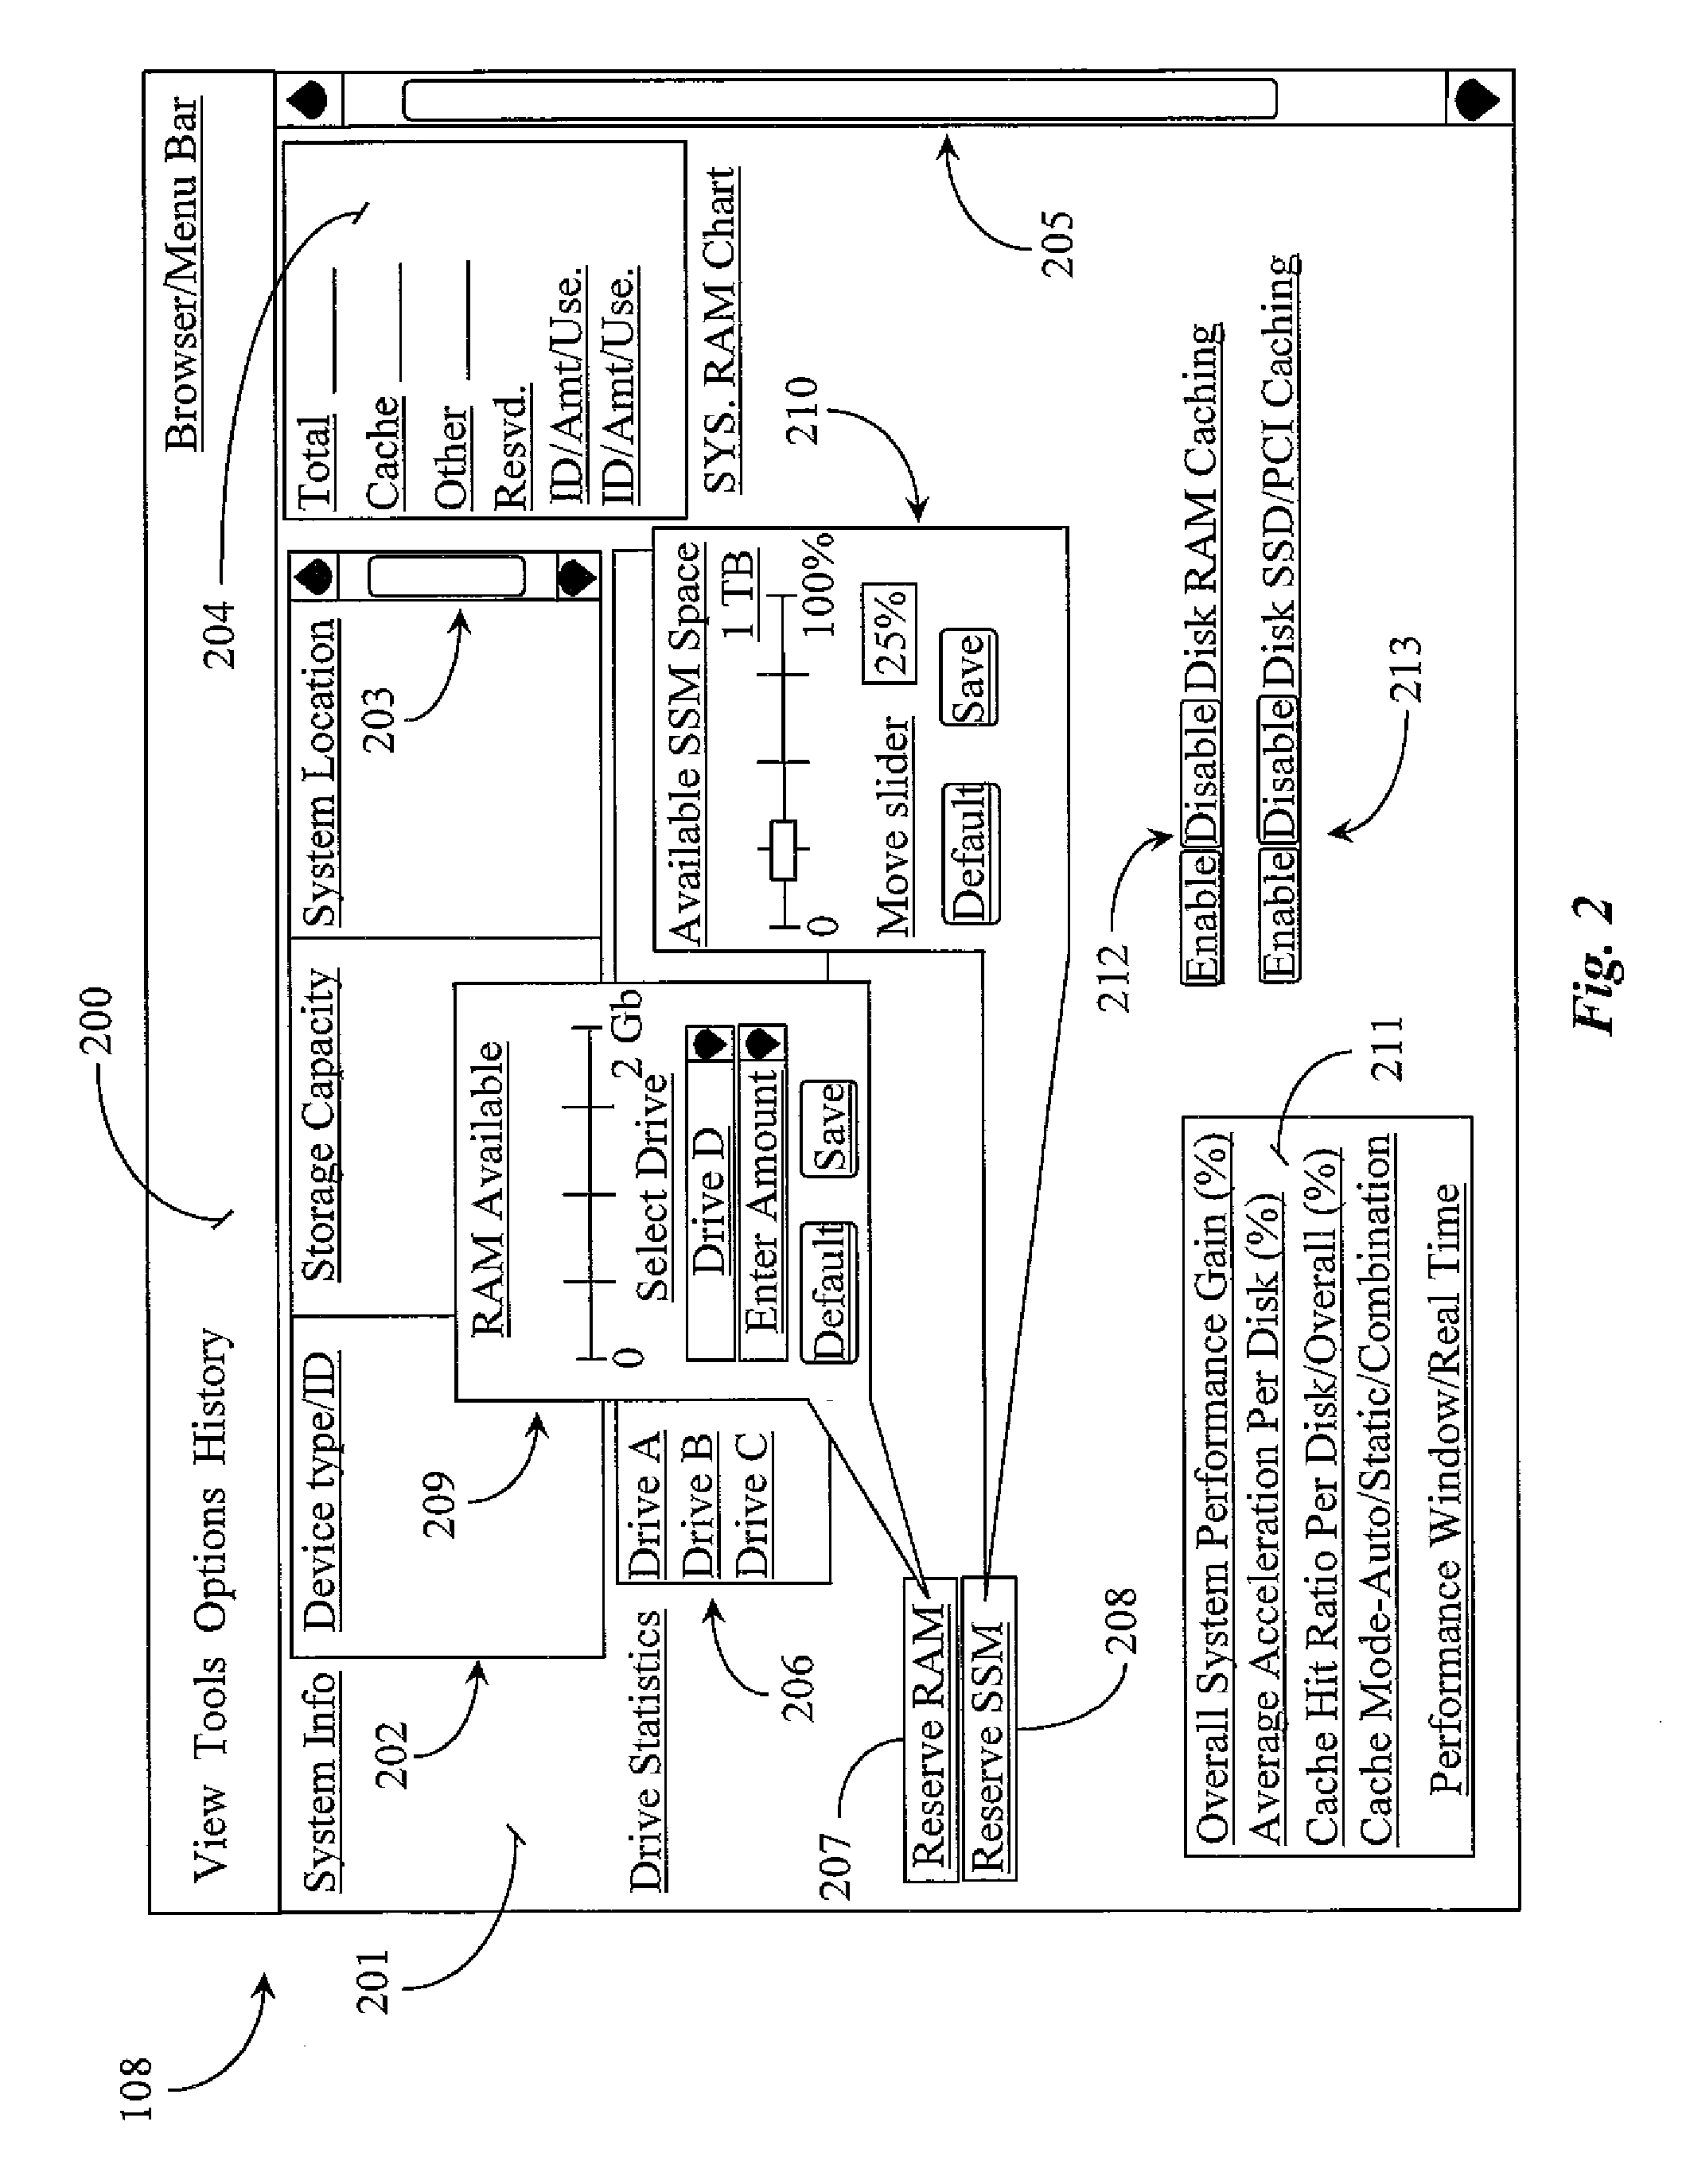 Method for Controlling Performance Aspects of a Data Storage and Access Routine